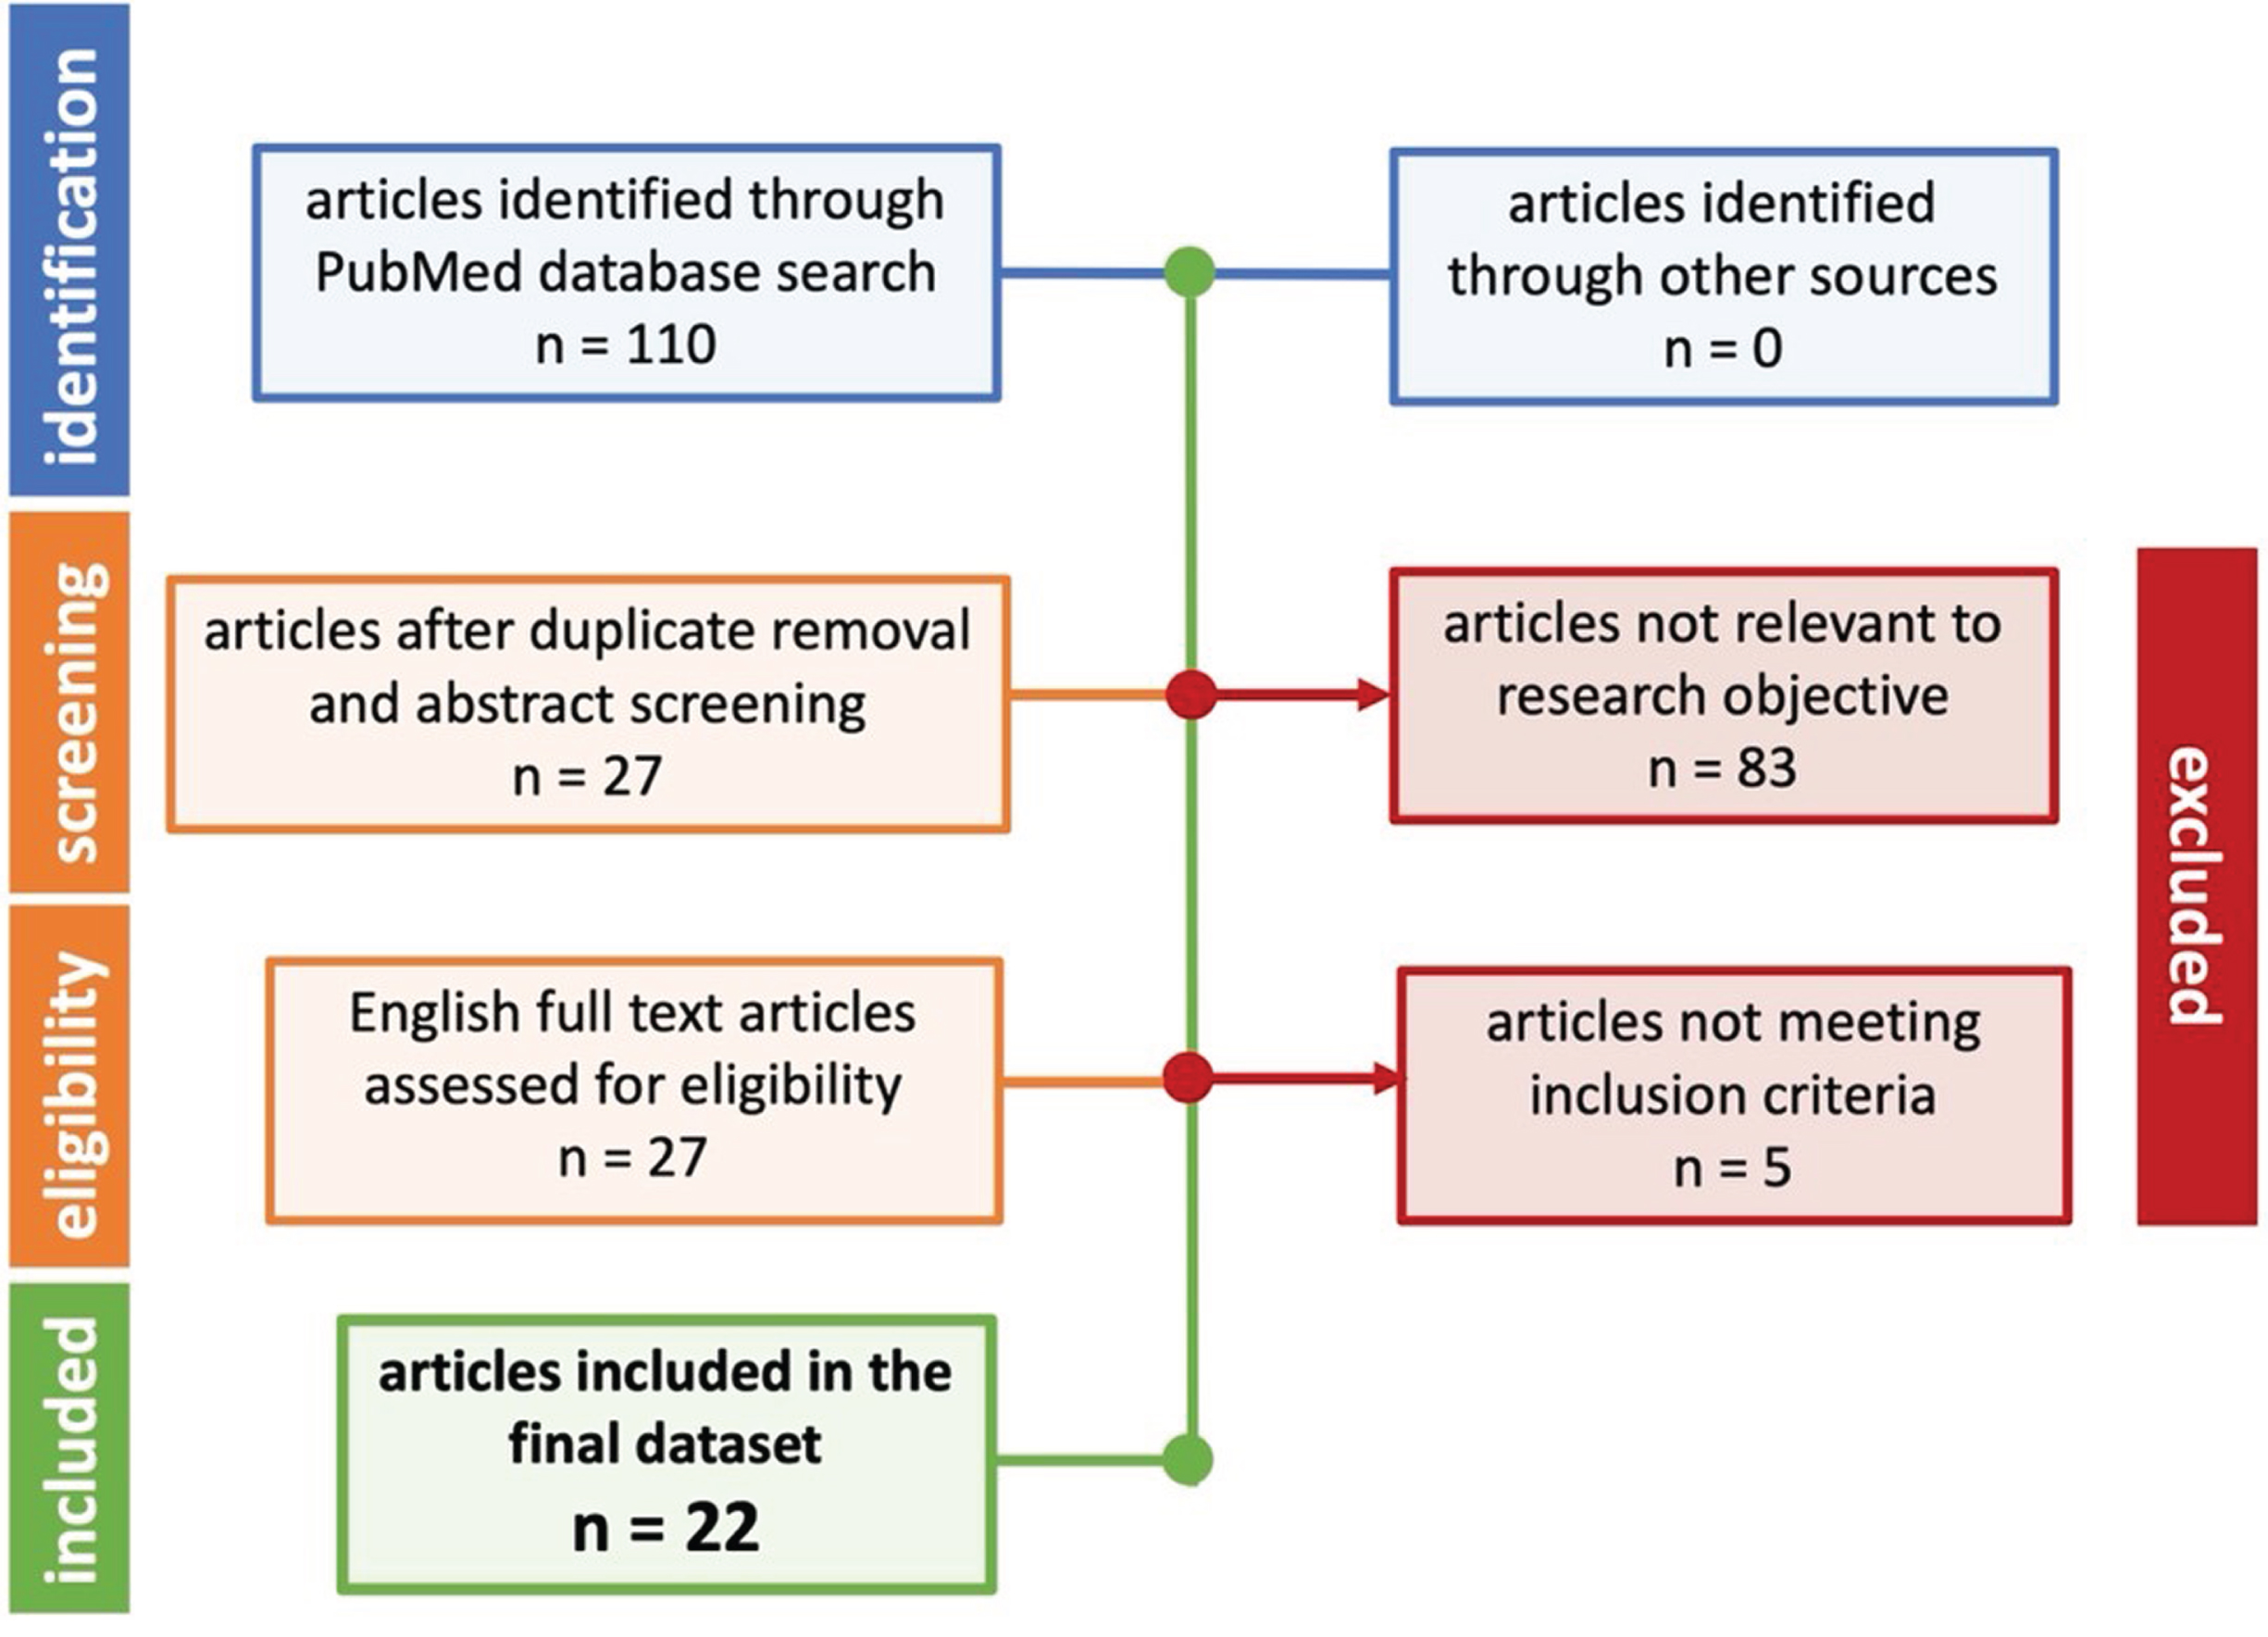 Prisma flow diagram for the systematic review of articles related to AD BACE. Once included, data was carefully curated into a relational database.